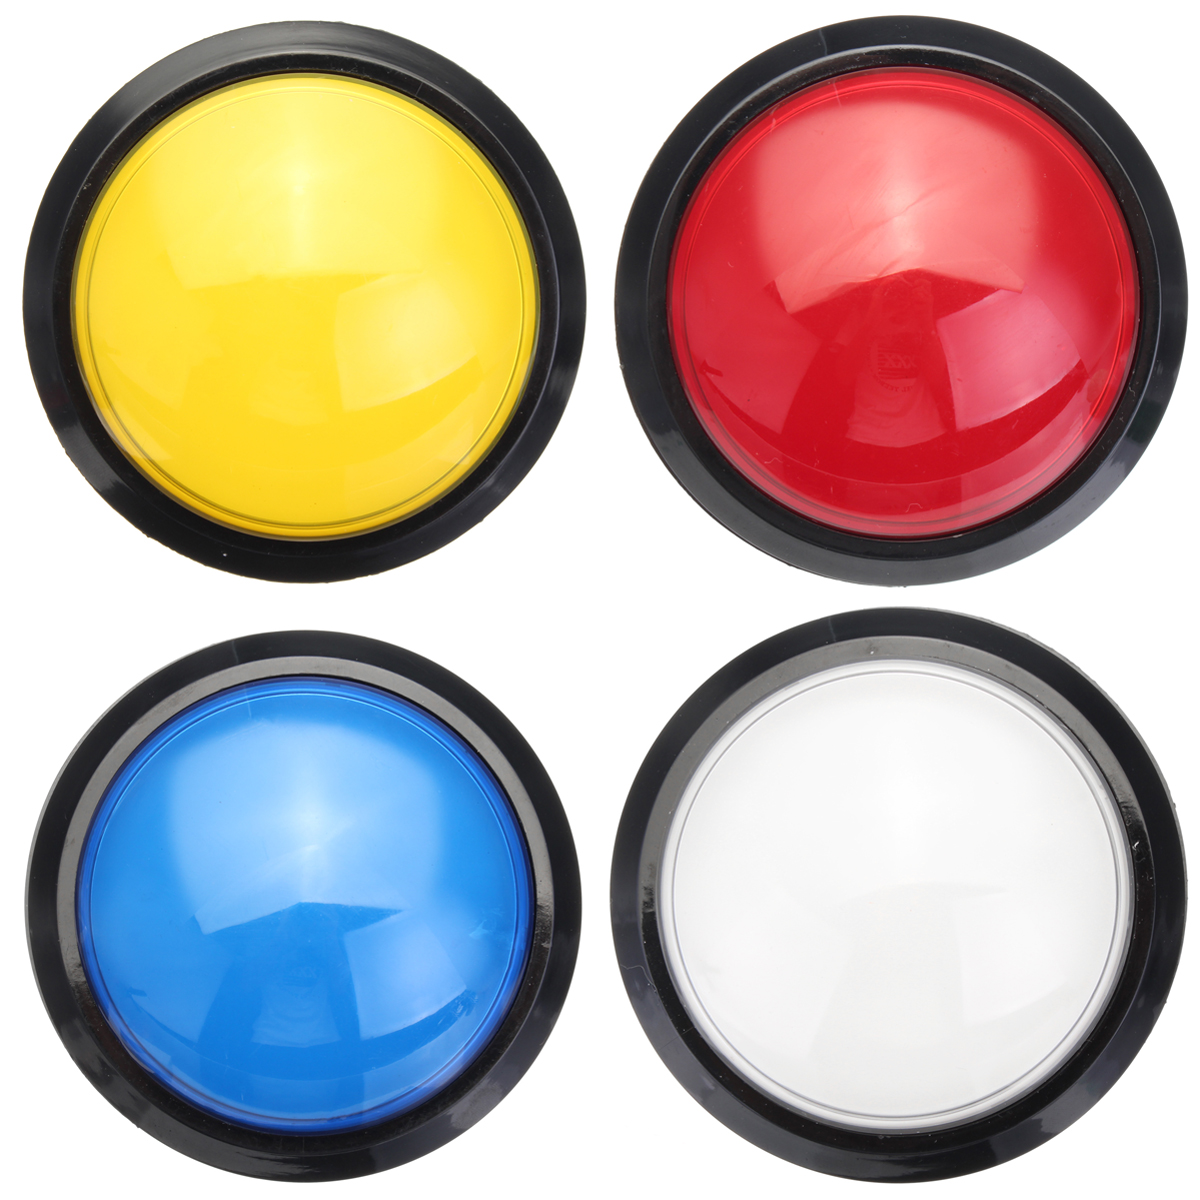 100mm Massive Arcade Button with LED Convexity Console Replacement Button 27